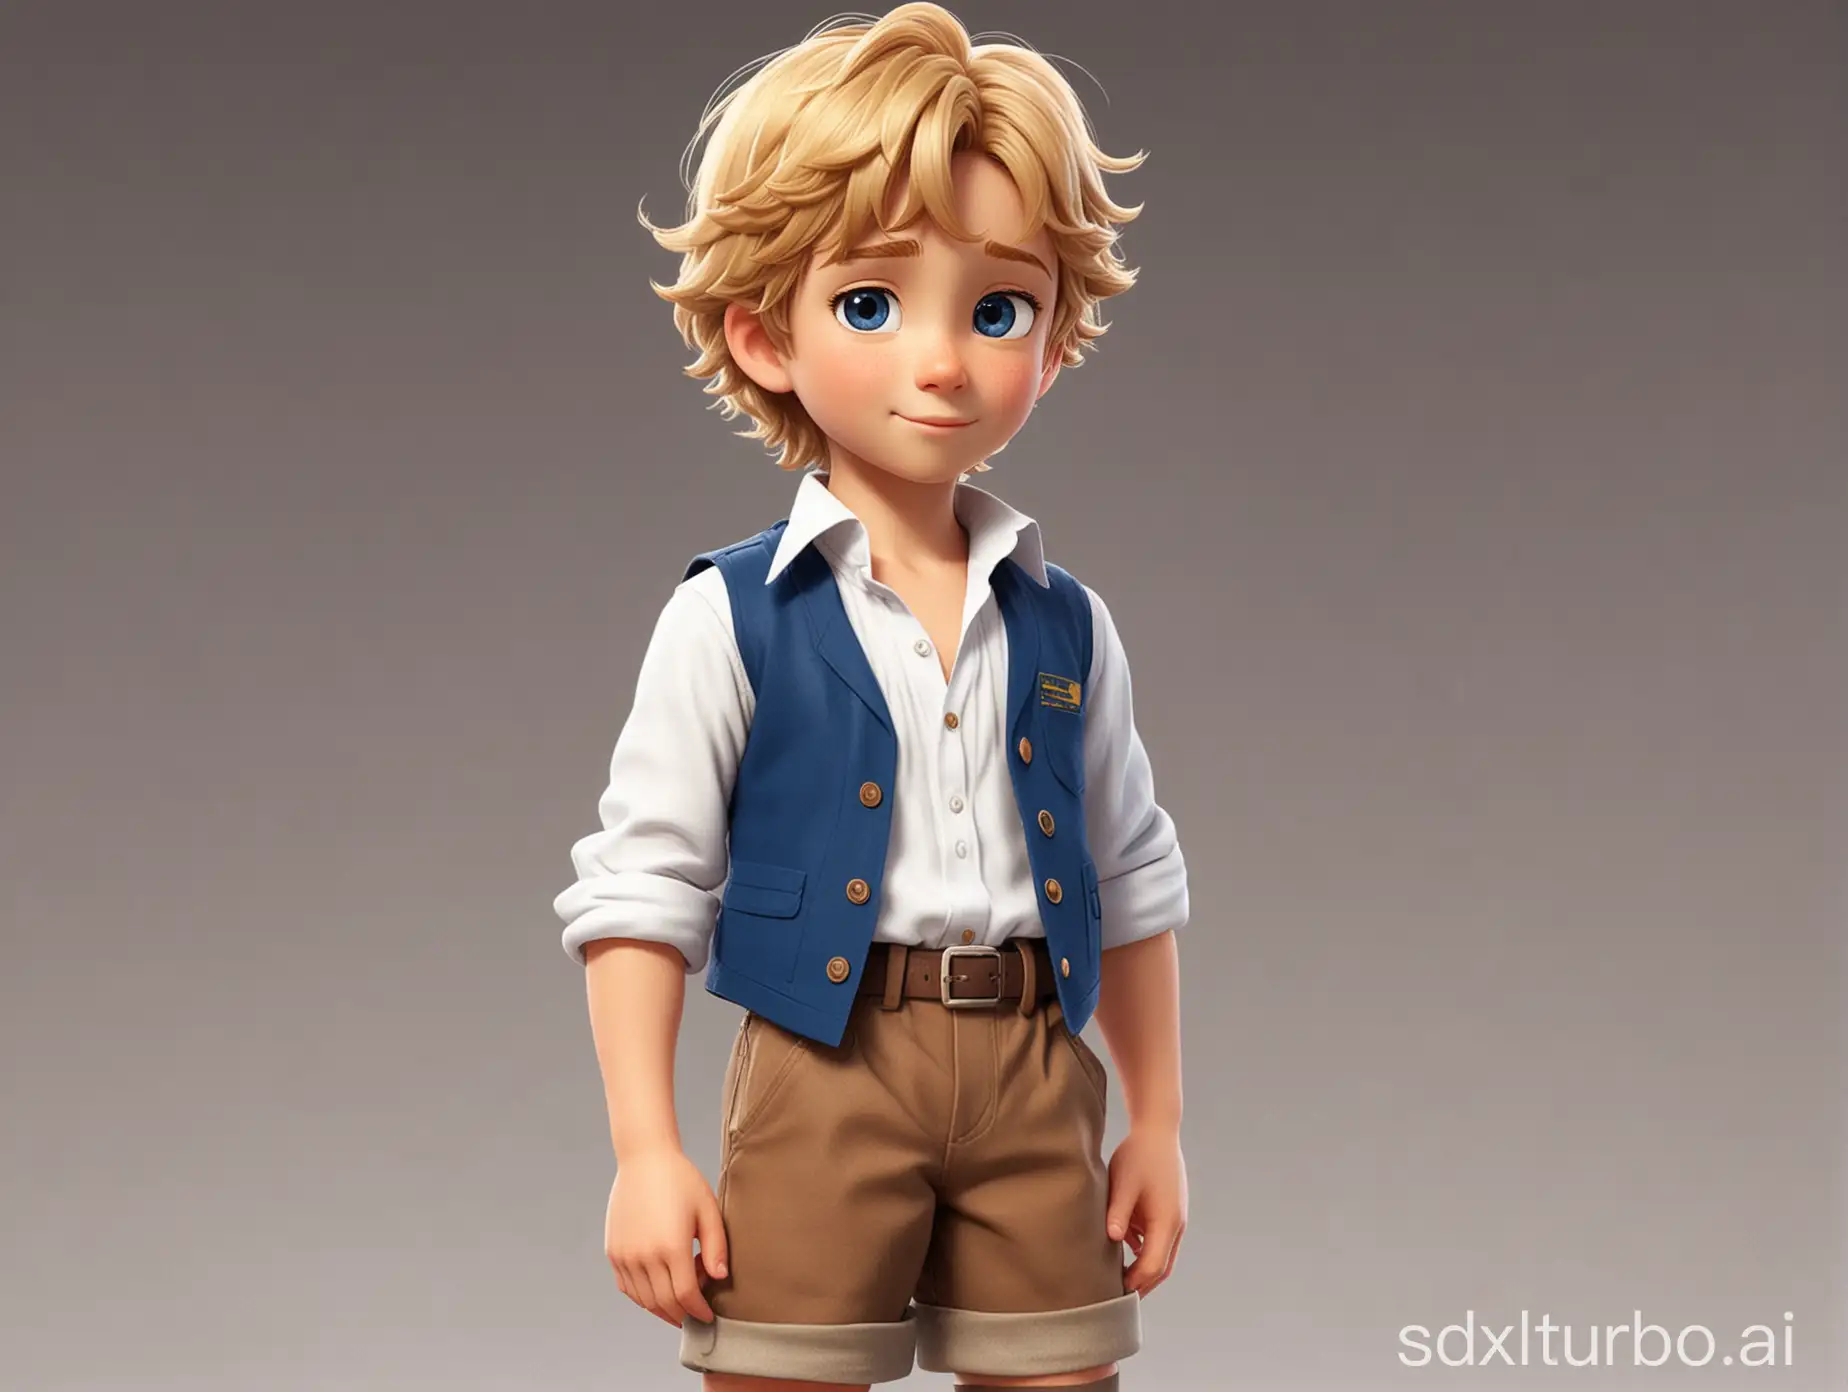 A Disney anime-style little boy with slightly curly blonde hair, wearing a white shirt, blue waistcoat, brown shorts, and brown Martin boots